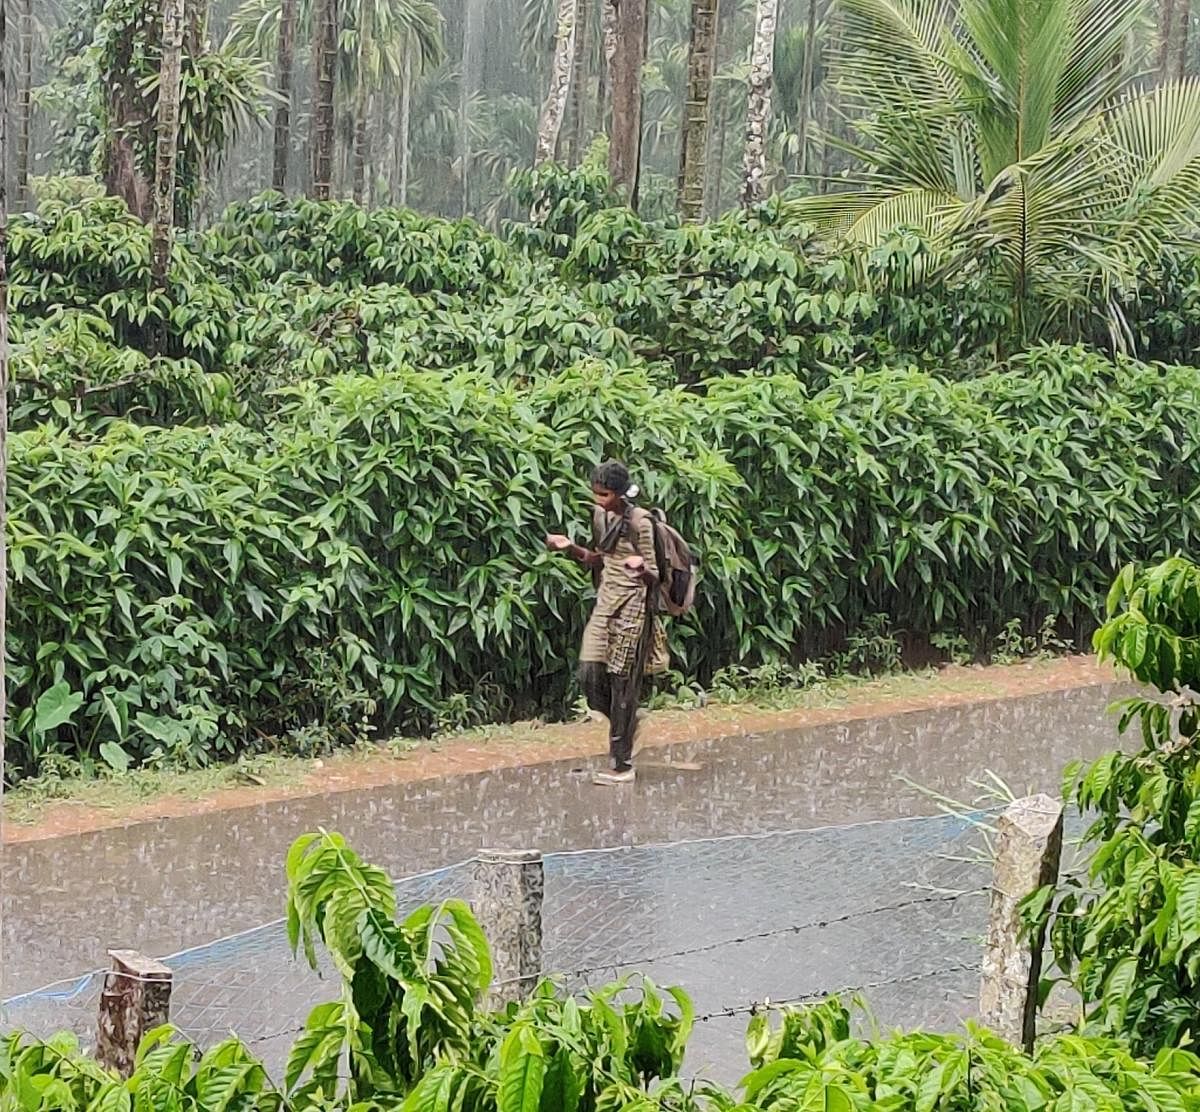 A student enjoys a walk in the rain at Kalasa in Chikkamagalur district on Thursday. DH Photo